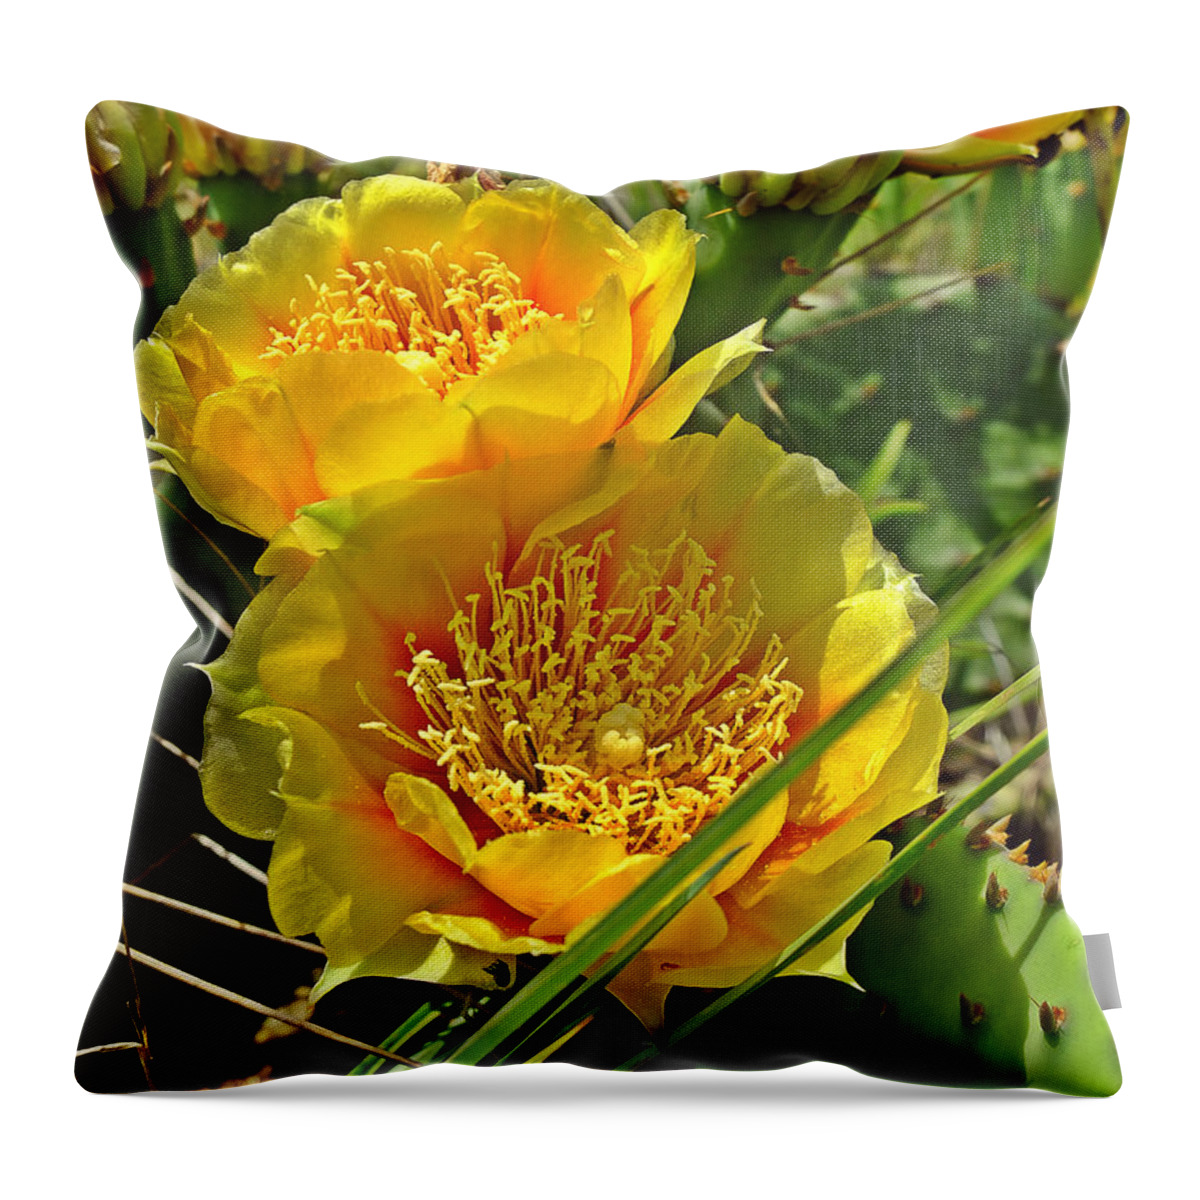 Cactus Throw Pillow featuring the photograph Cactus Bloom by Scott Kingery